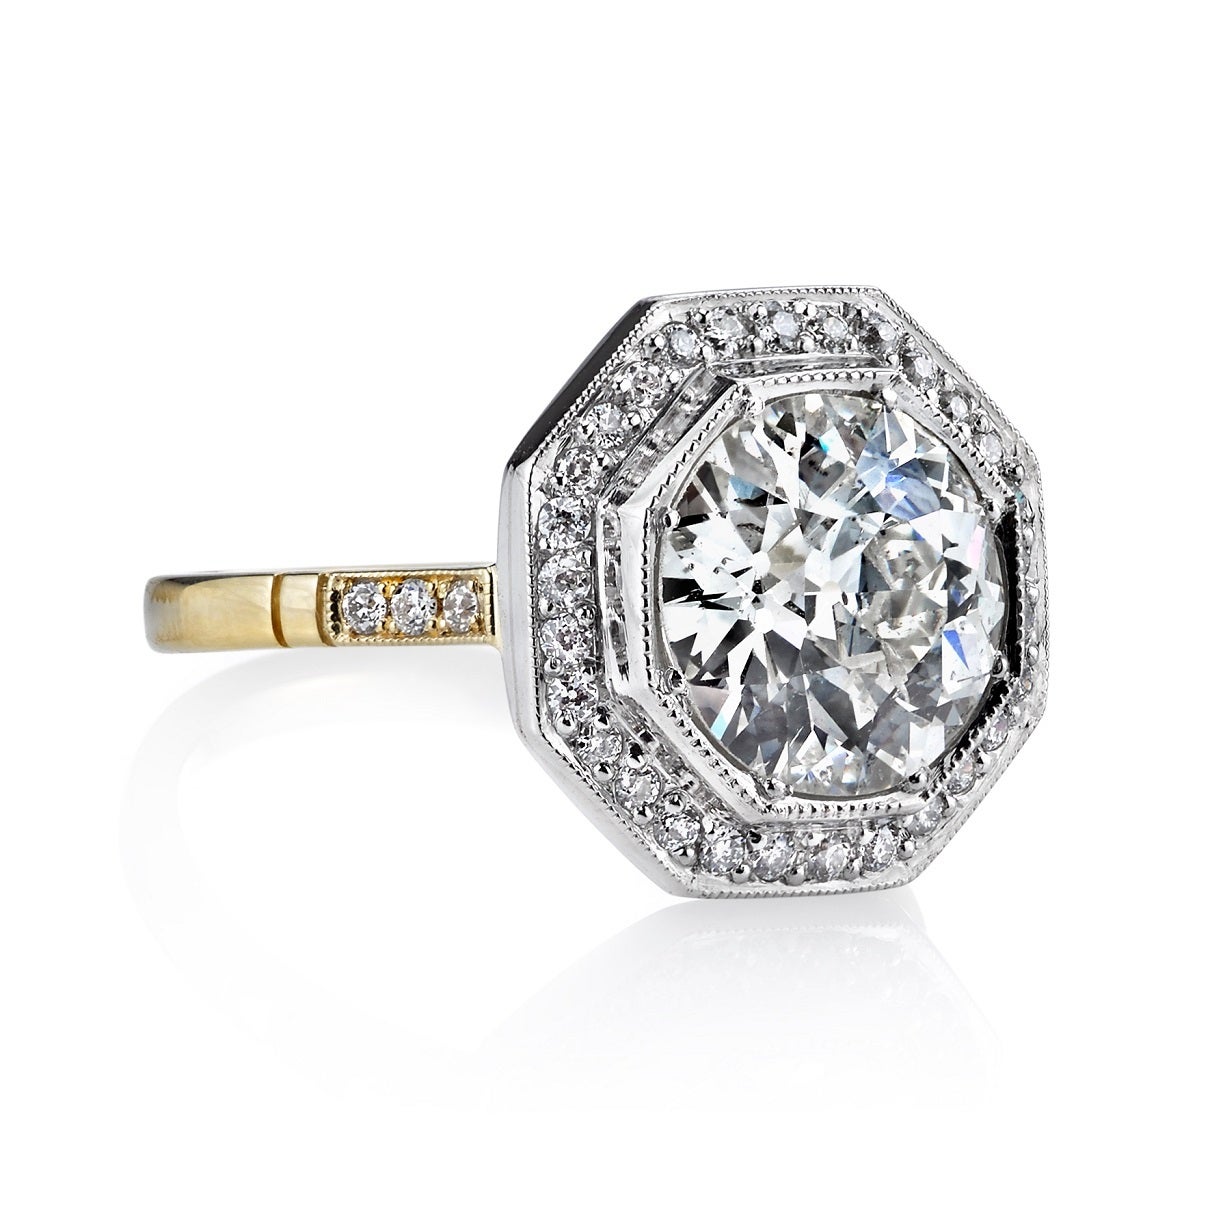 2.47ct H/SI2 EGL certified old European cut diamond set in a handcrafted platinum and 18k yellow gold mounting. An octagonal halo design featuring a low profile, two toned metal and intricate gallery.